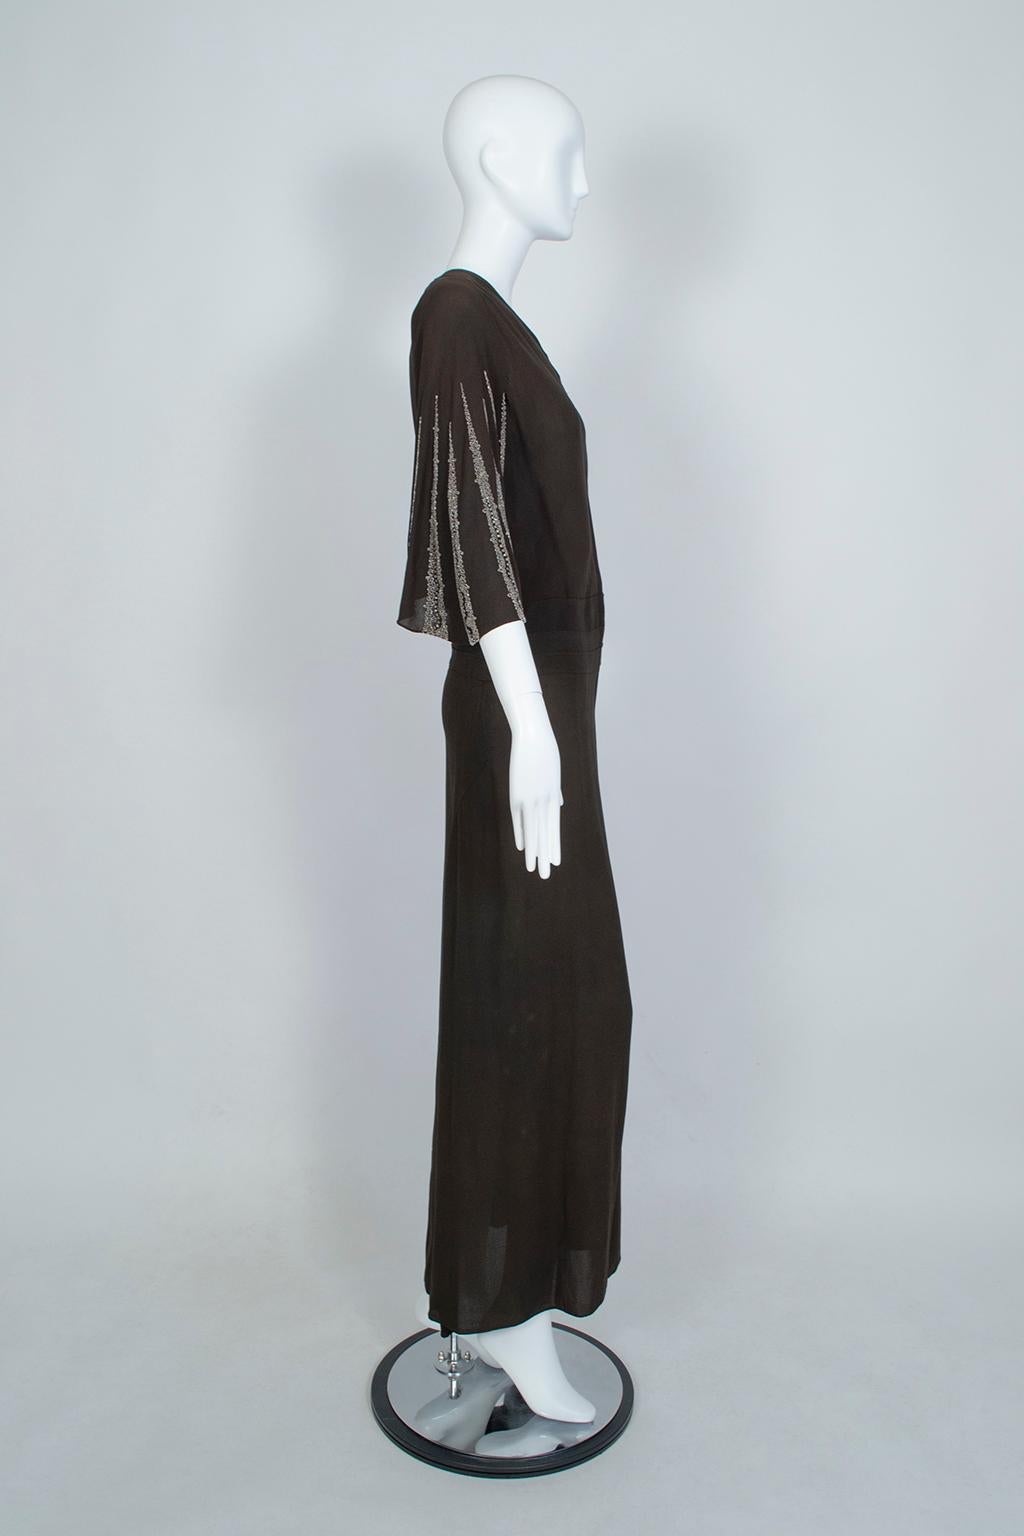 Dignified and statuesque, this gown combines the modesty and rigor of a kimono with the body conscious glamour of the 1930s. The high cut asymmetrical bodice and inset obi waist detail keep it demure, but the fluttering batwing sleeves—dripping with